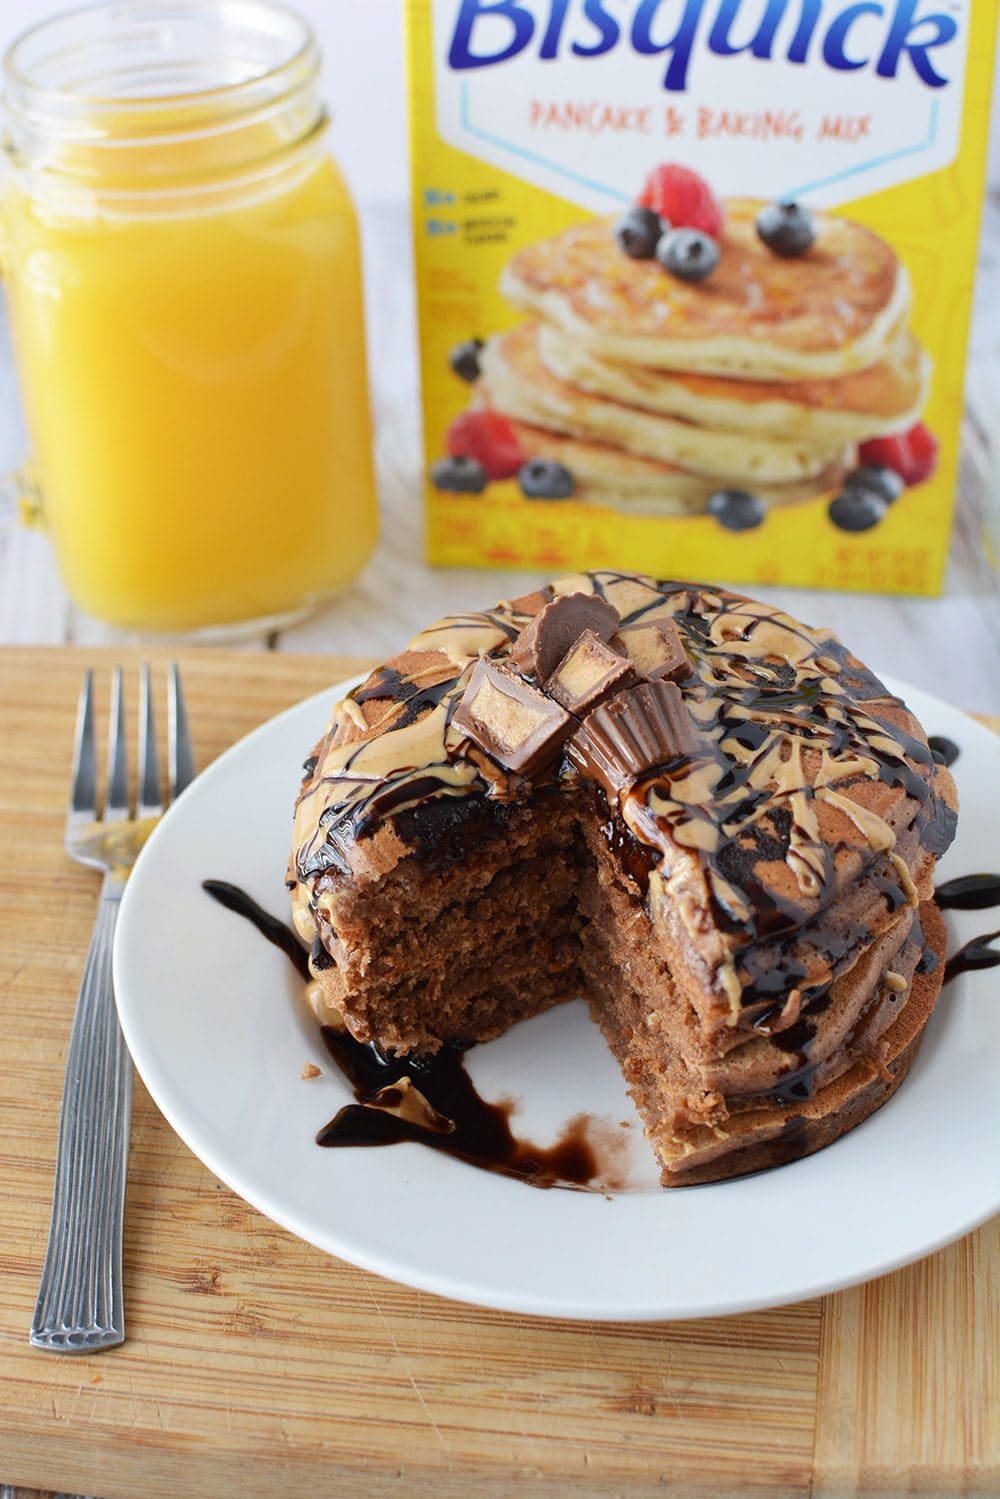 Chocolate peanut butter pancakes in front of box of Bisquick.